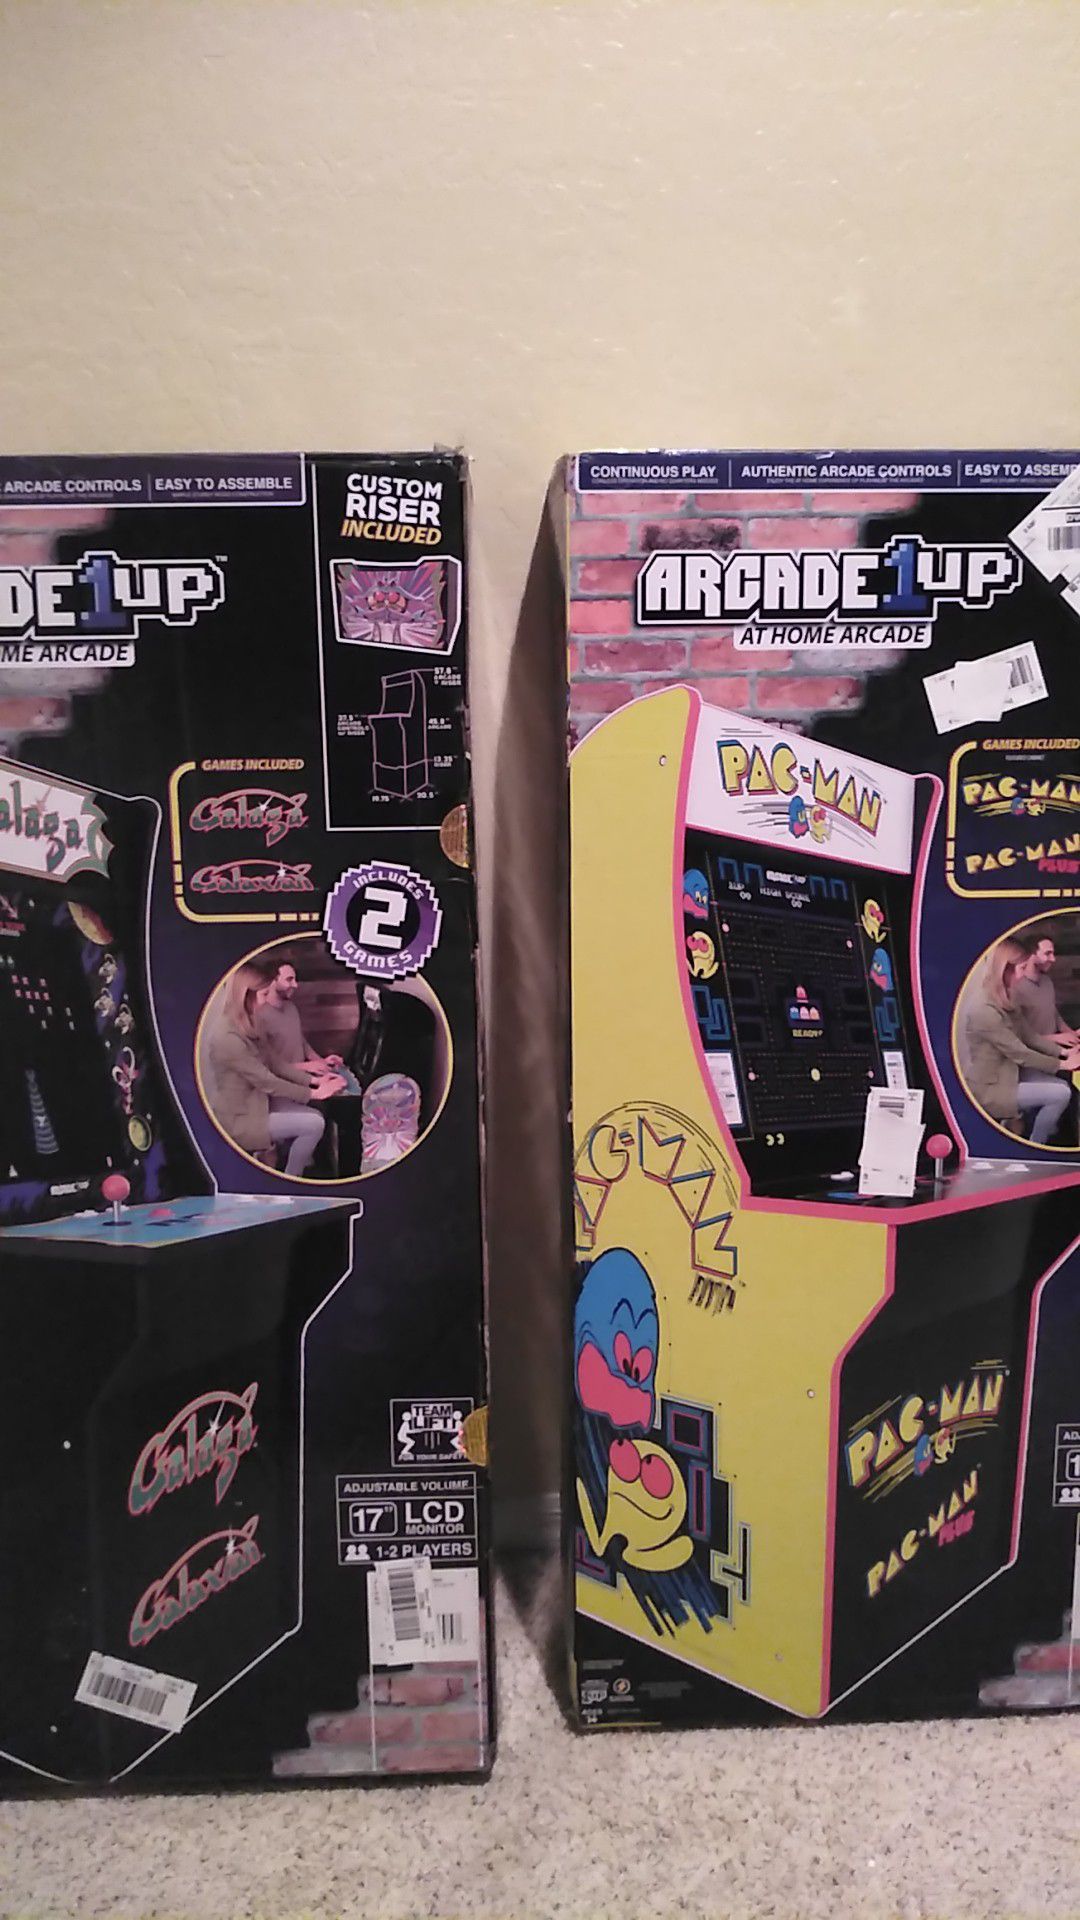 Two full size arcade games